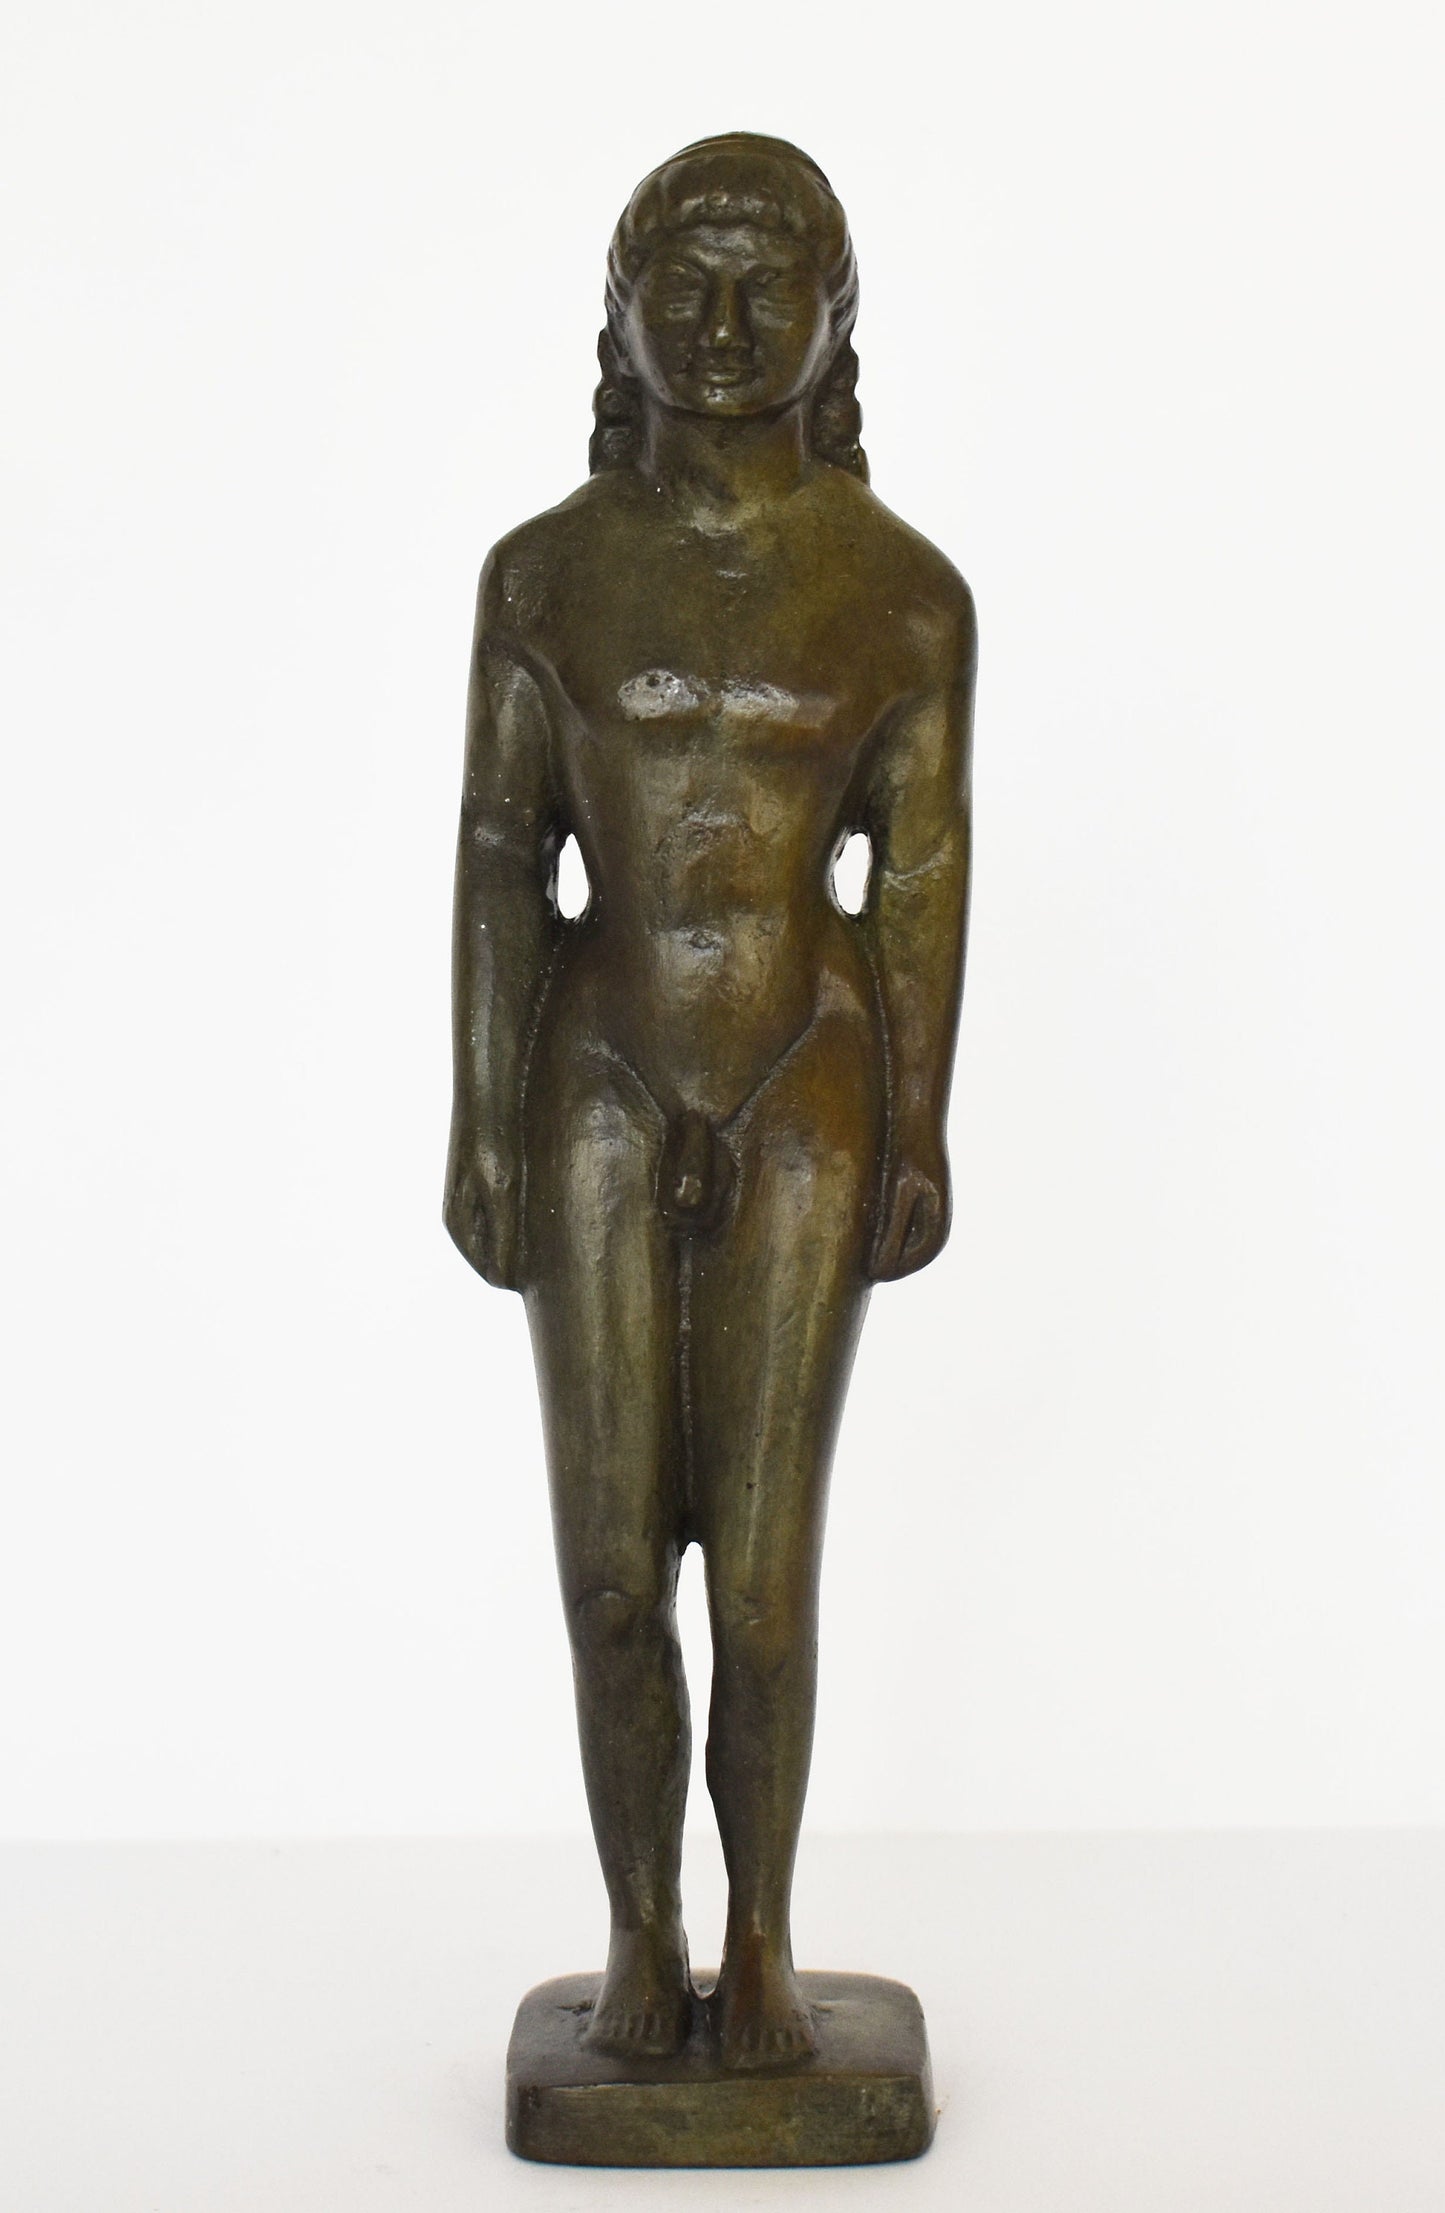 Kouros - Nude Male Youth - Free-Standing Ancient Greek Sculpture - Archaic Period - Dedication to the Gods - pure Bronze Sculpture